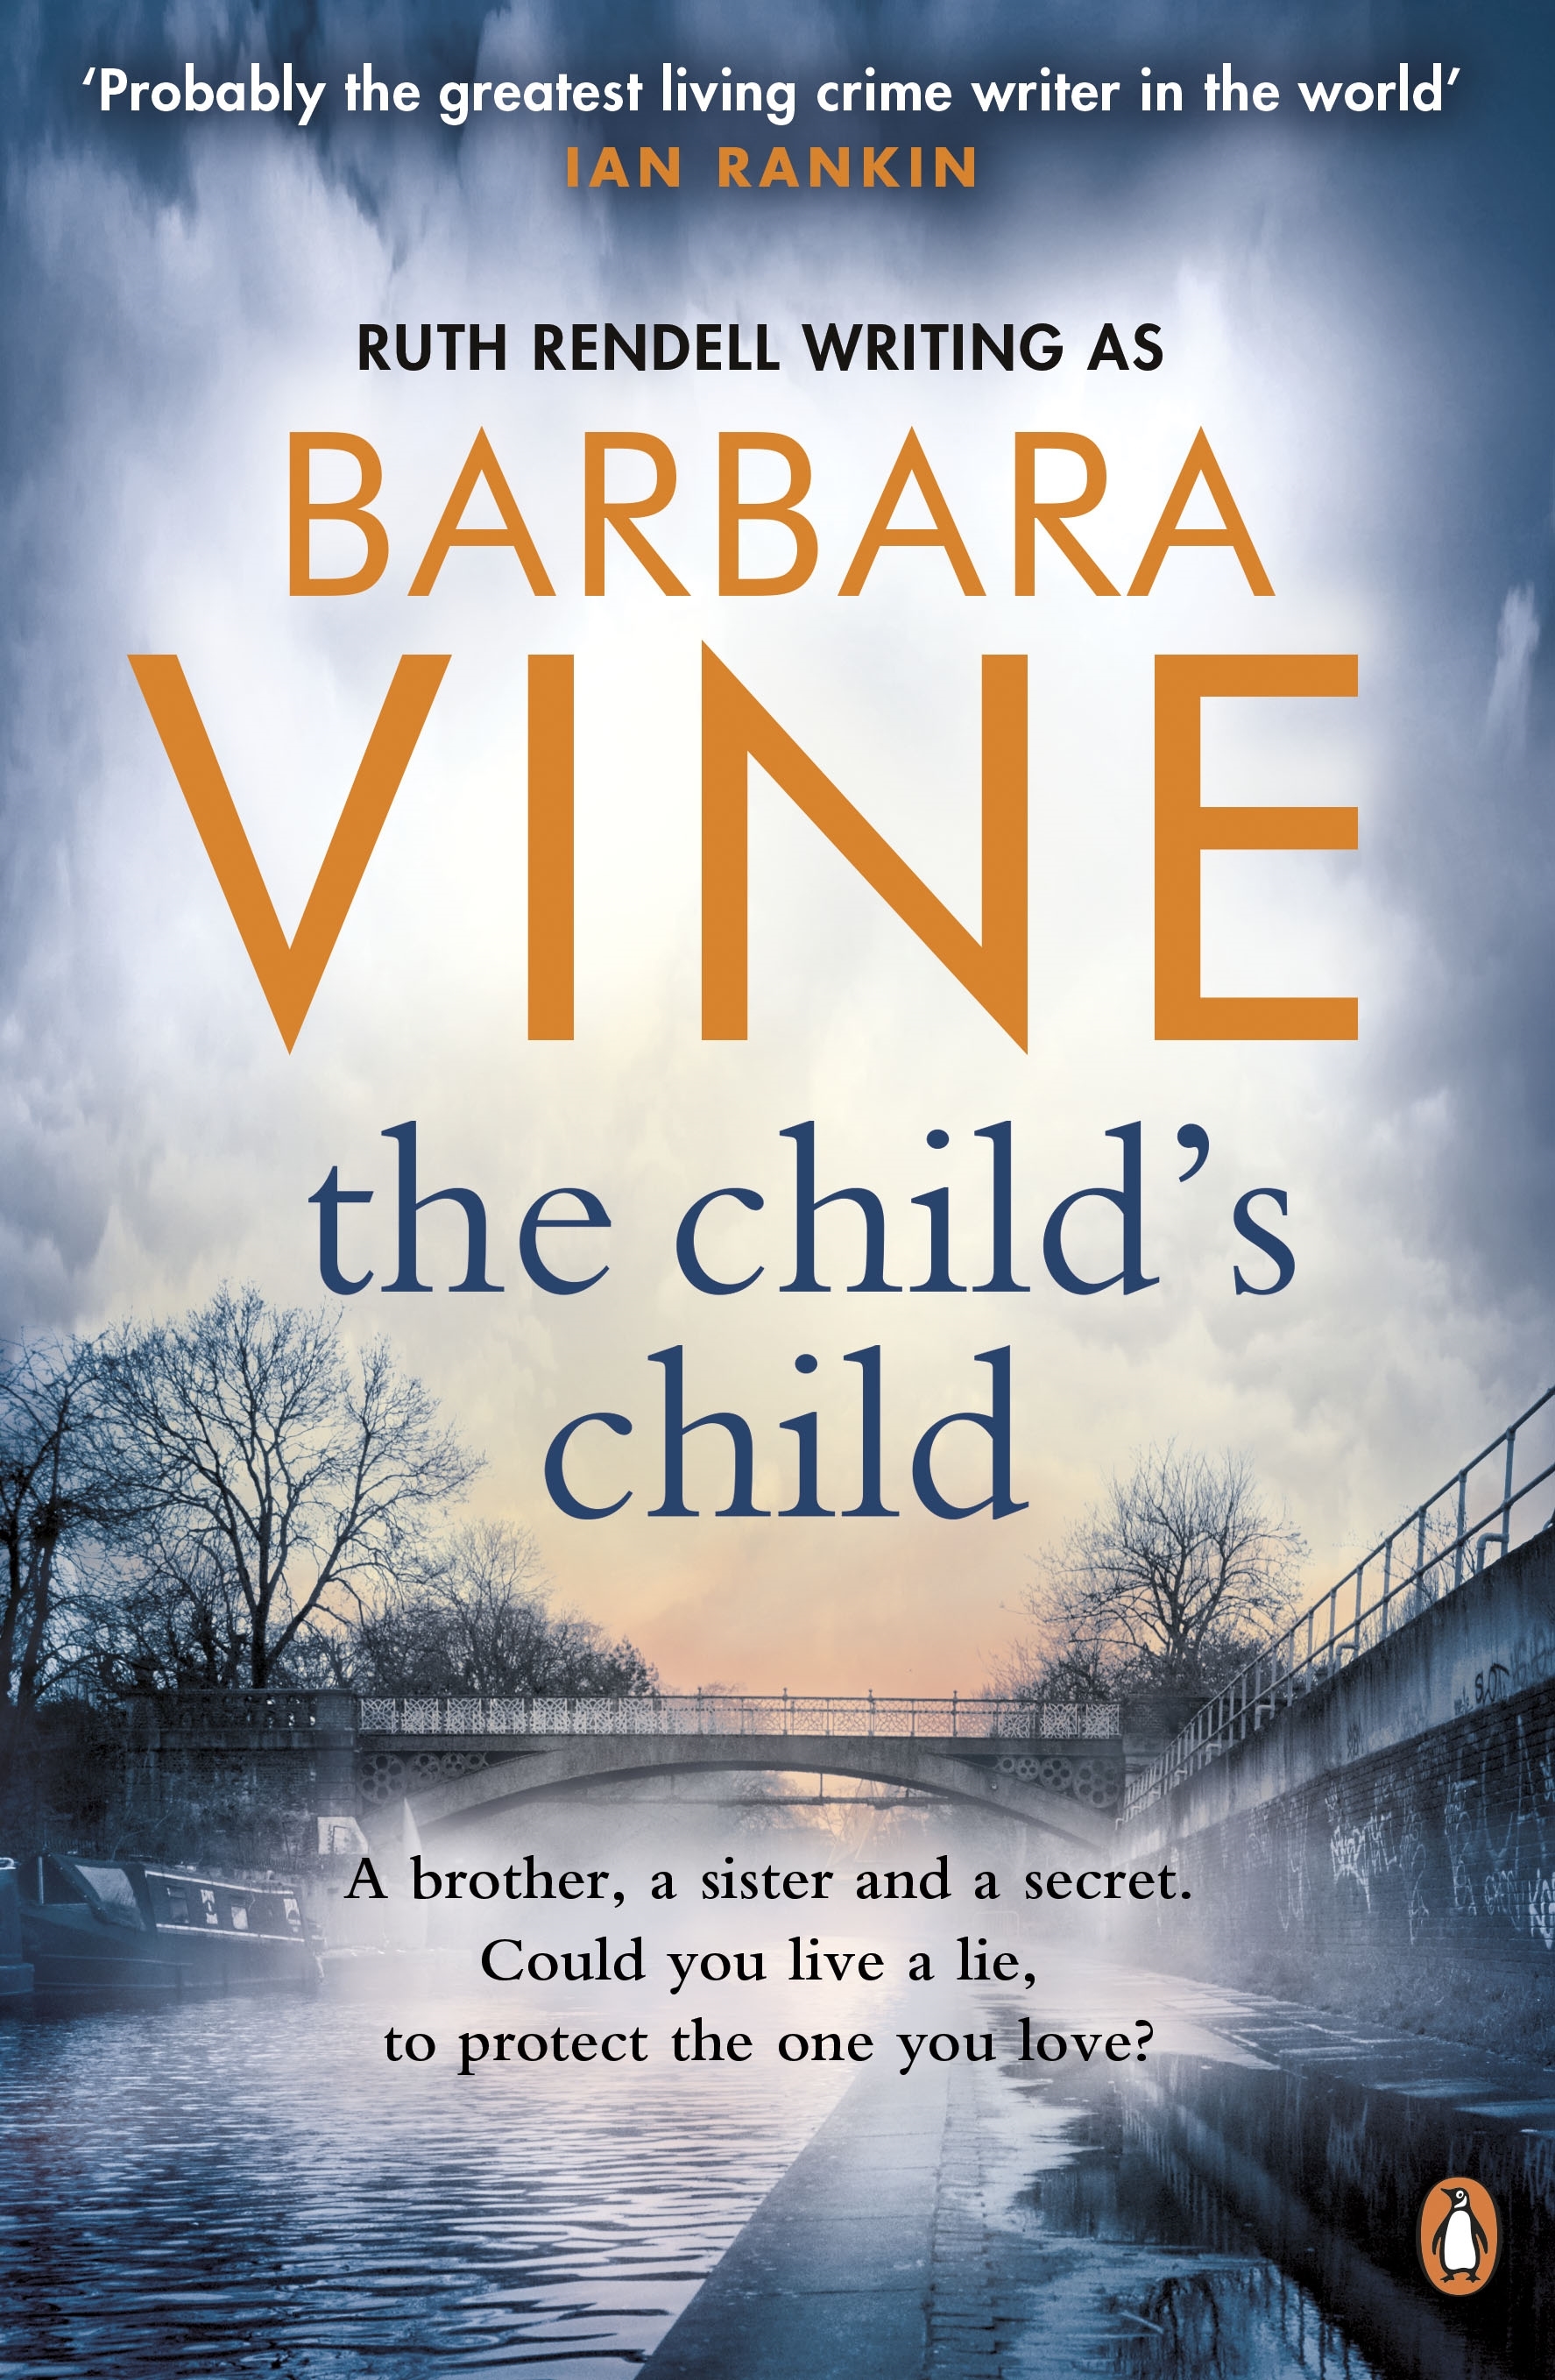 Cover of The Child's Child by Barbara Vine.